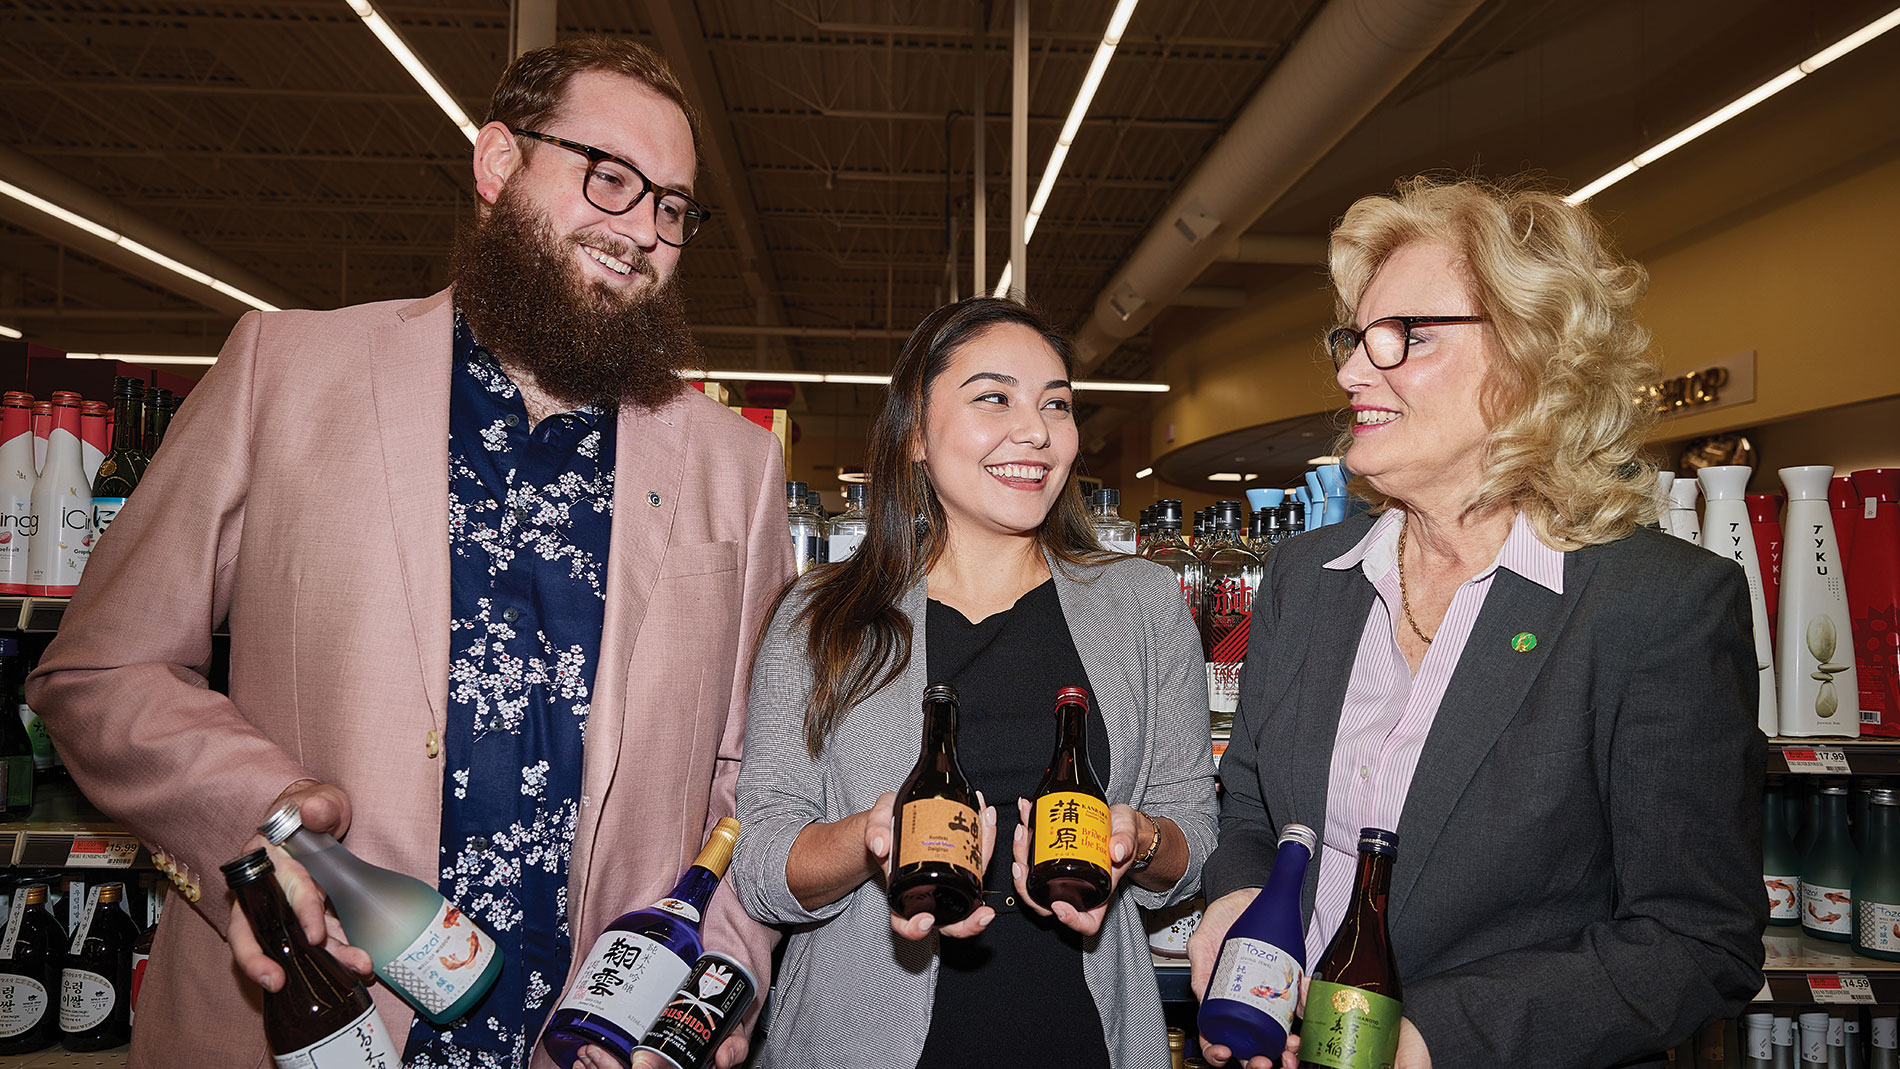 from left: andrew lamb, kira webster and patricia wamhoff shop for sake at pan-asia supermarket